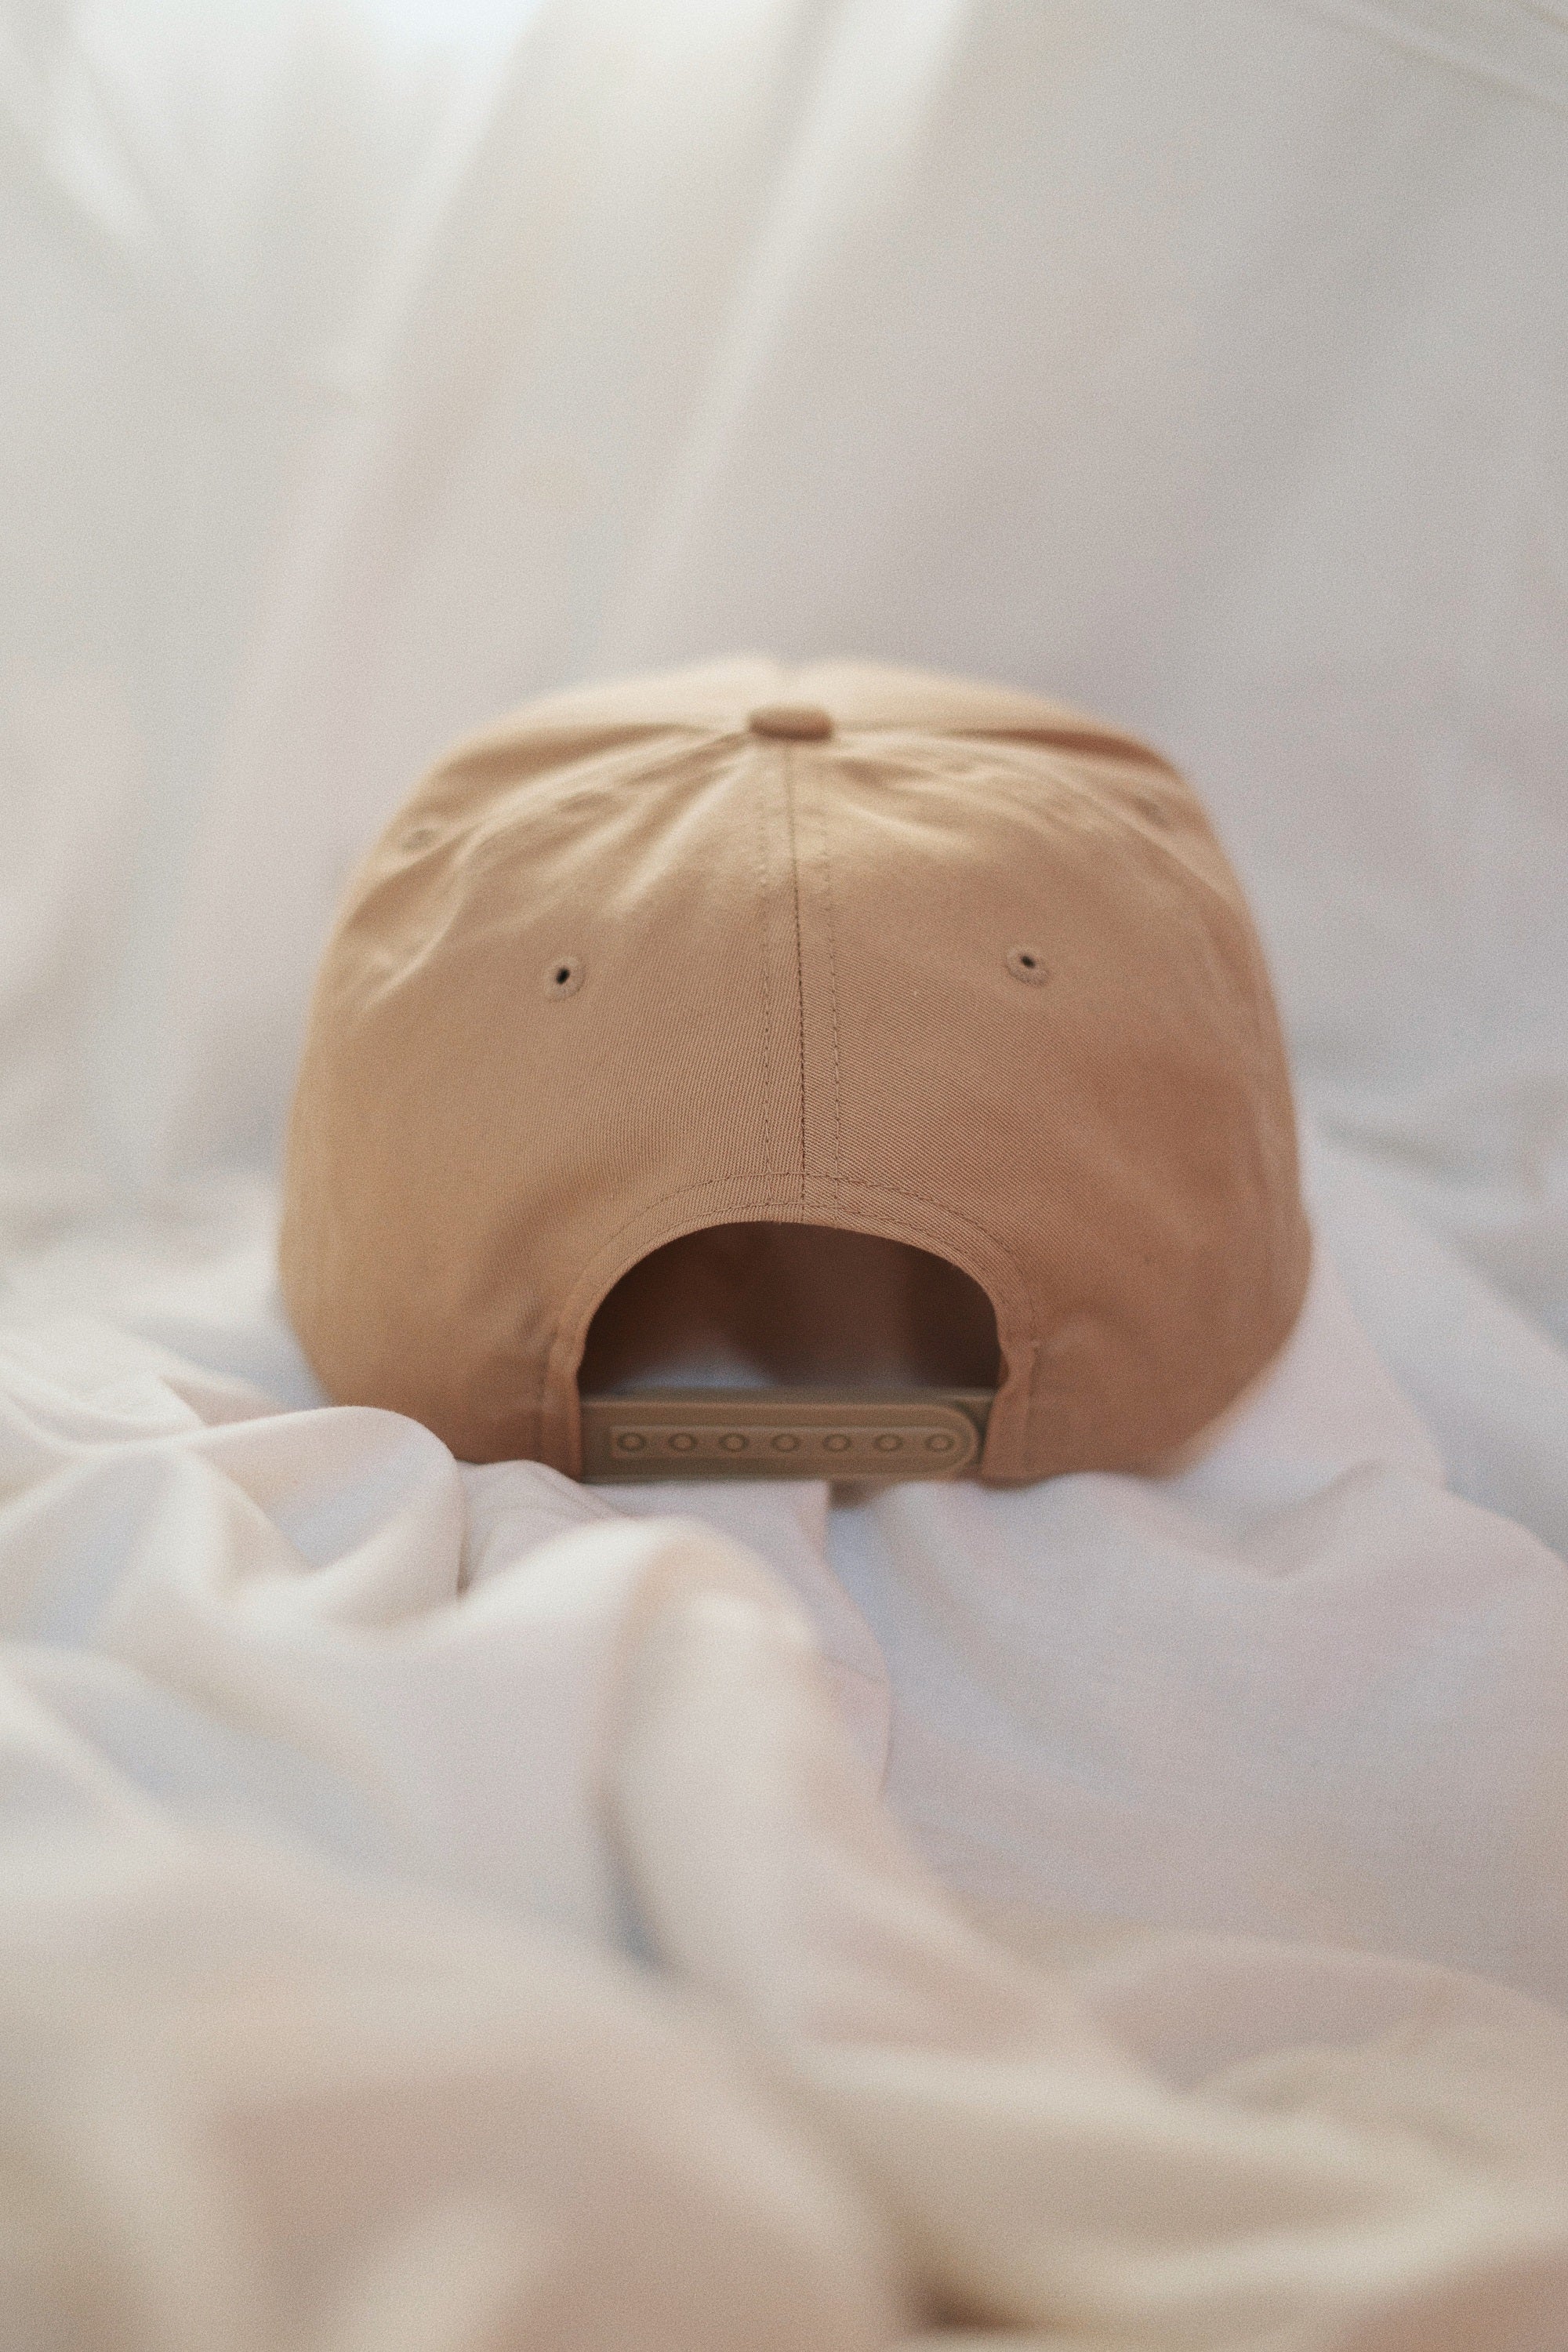 The Power of the Human Touch 5 Panel Cap